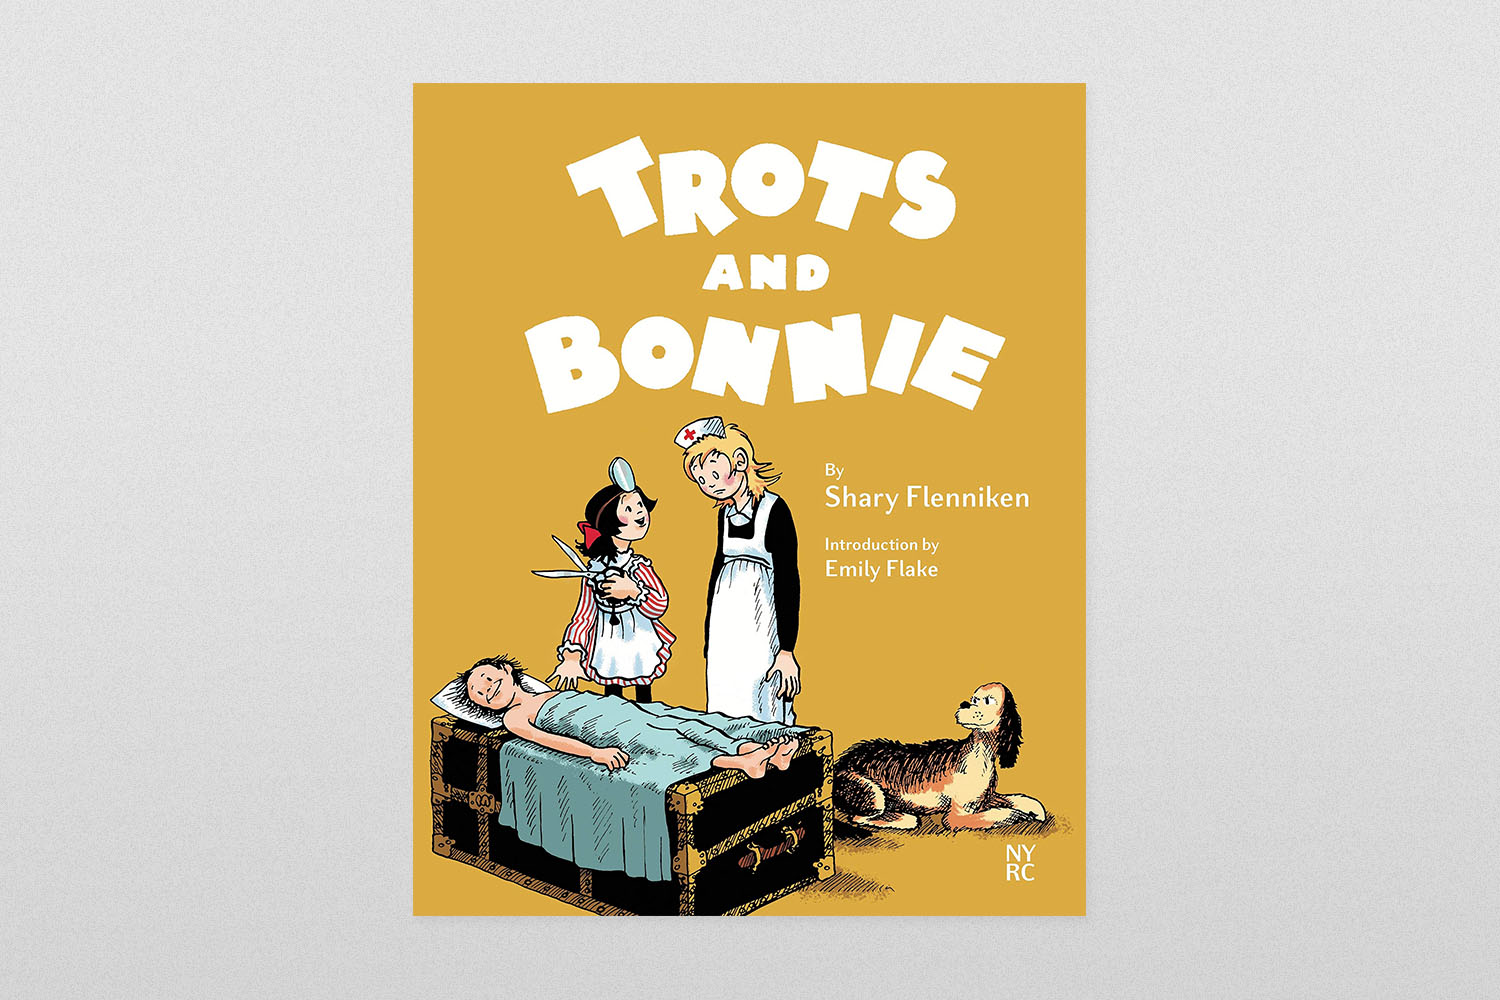 "Trots and Bonnie"